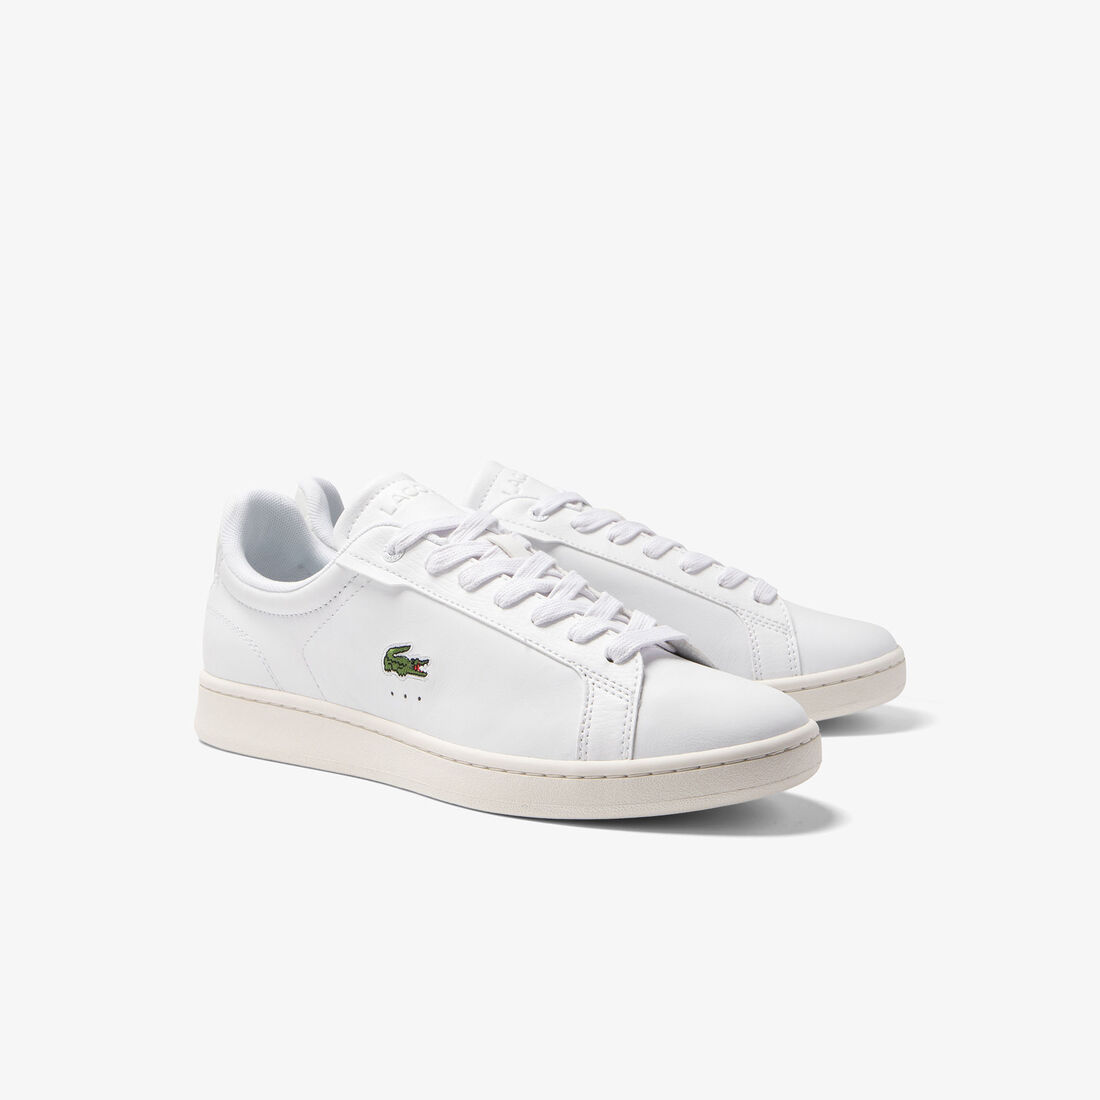 Men's Lacoste Carnaby Pro Leather Premium Trainers - 45SMA0112-65T